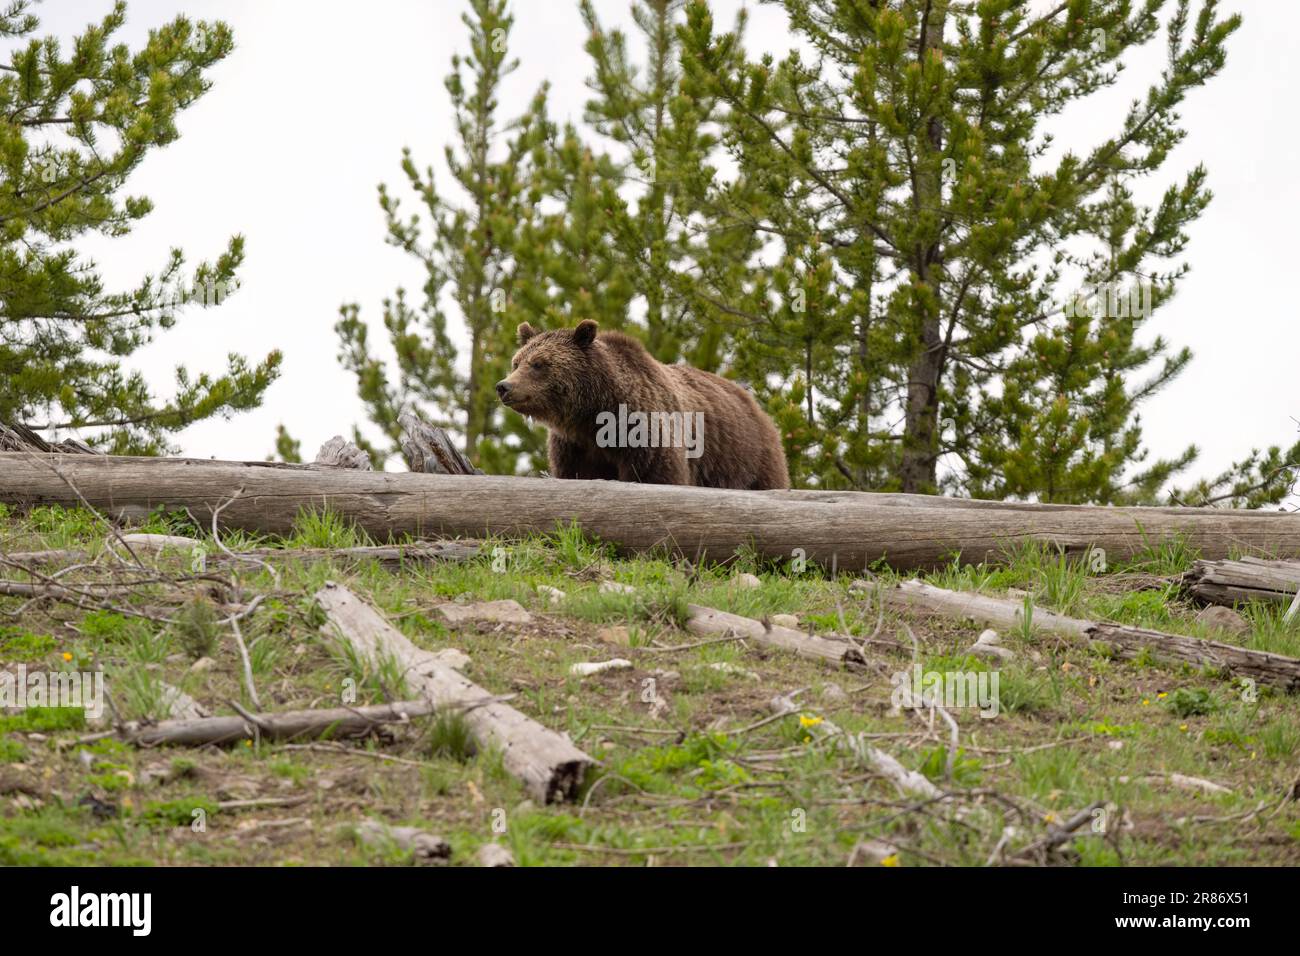 Grizzly bear on hill, Yellowstone Stock Photo